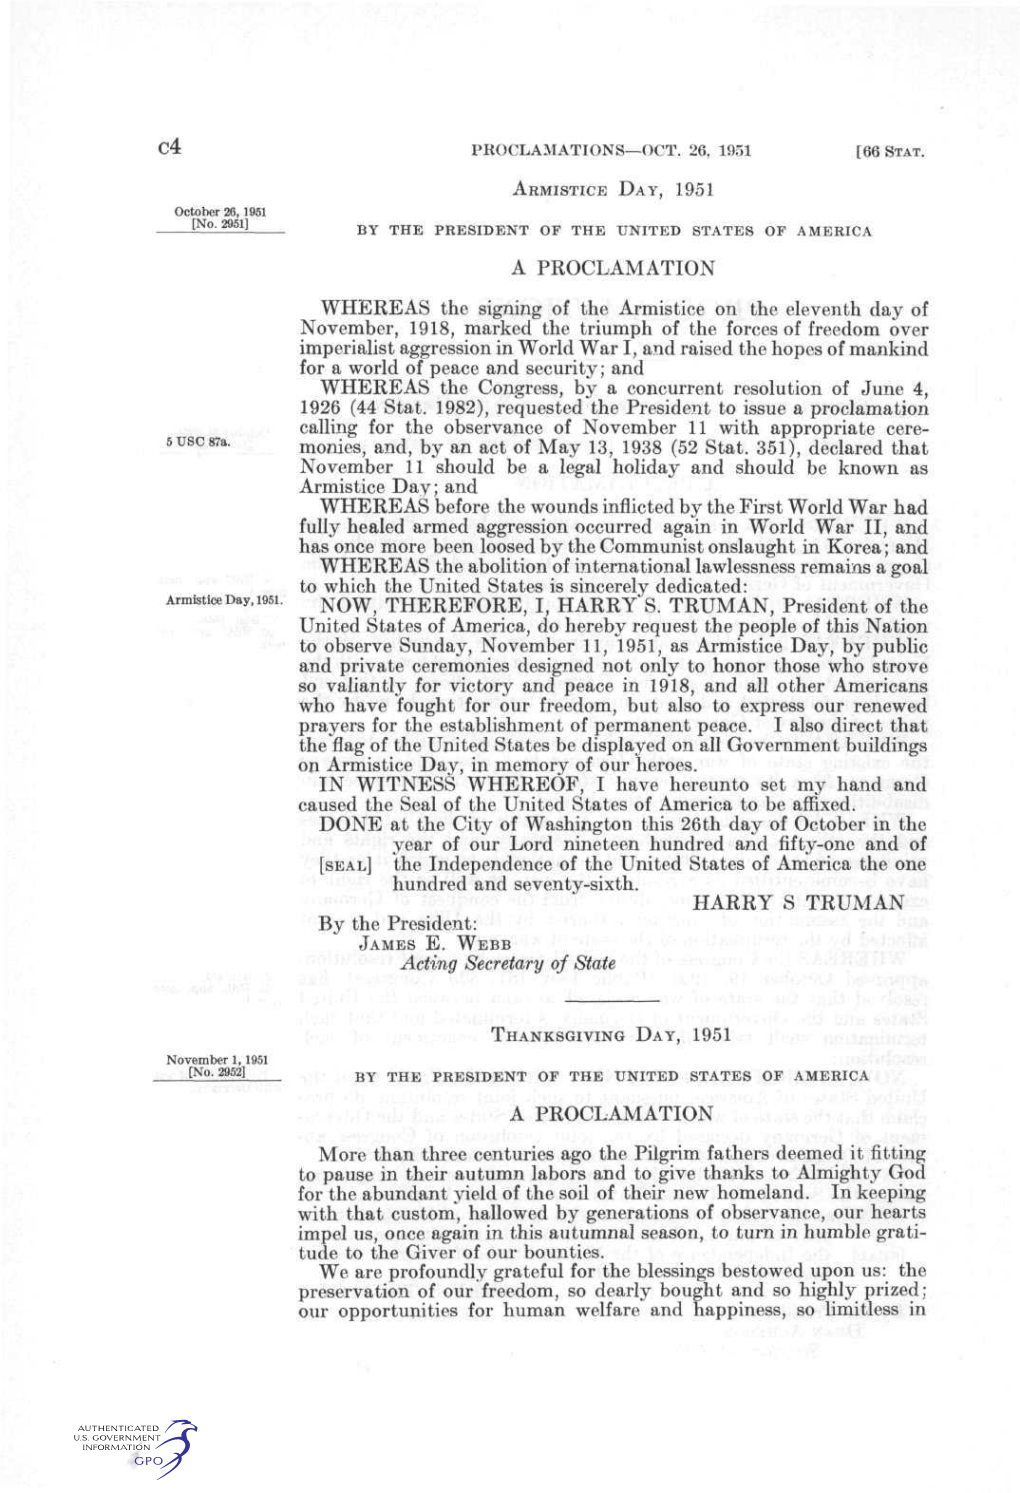 G4 a PROCLAMATION WHEREAS the Signing of the Armistice on The